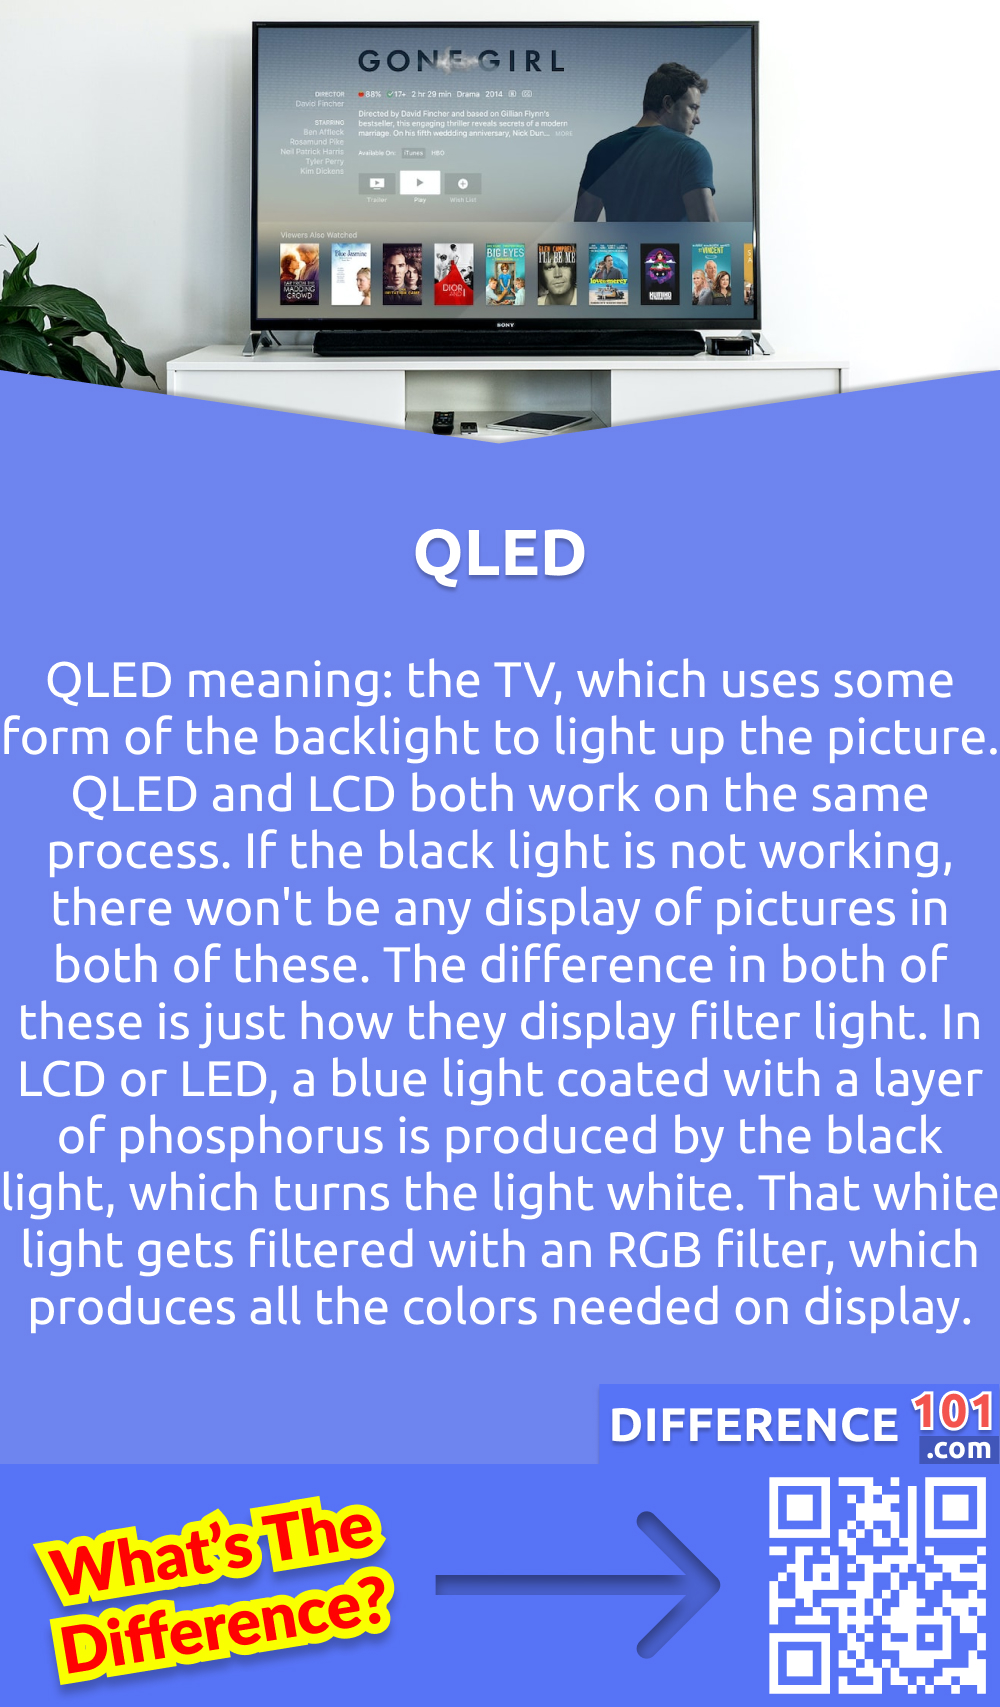 What Is QLED? QLED meaning: the TV, which uses some form of the backlight to light up the picture. QLED and LCD both work on the same process. If the black light is not working, there won't be any display of pictures in both of these. The difference in both of these is just how they display filter light. In LCD or LED, a blue light coated with a layer of phosphorus is produced by the black light, which turns the light white. That white light gets filtered with an RGB filter, which produces all the colors needed on display.